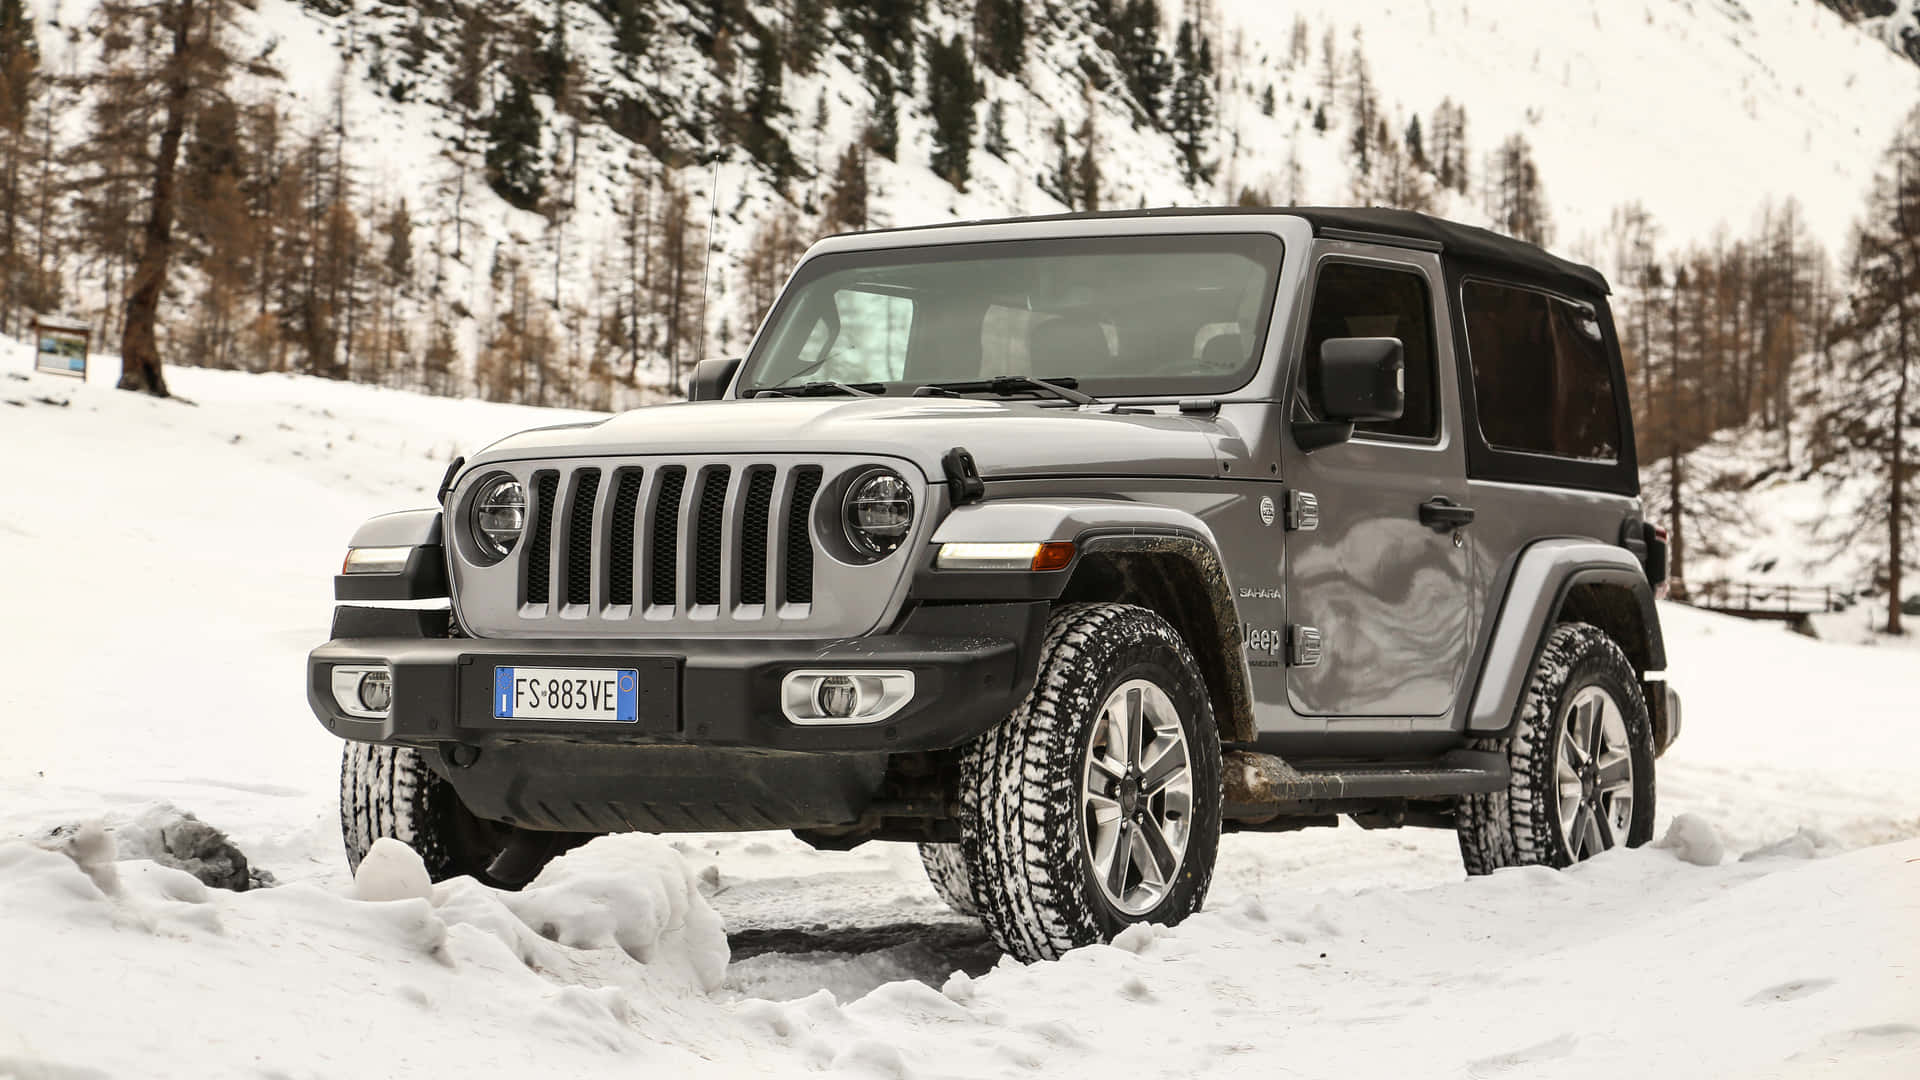 Unlock your next adventure with the iconic Jeep Wrangler